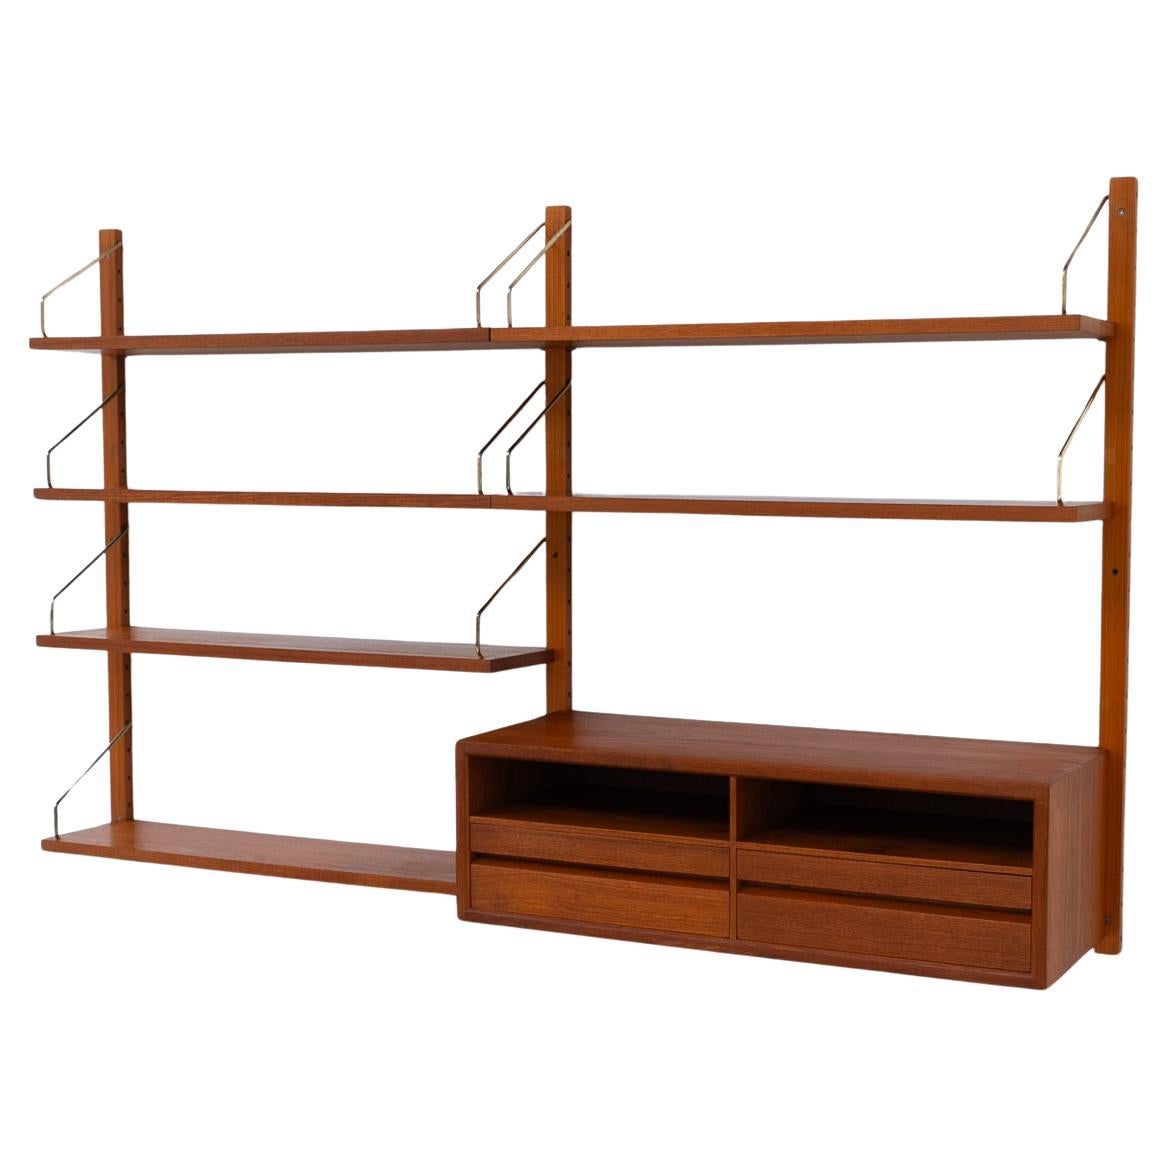 Danish Modern 2-Bay Modular Teak Wall Unit by Poul Cadovius for Cado, 1960s. For Sale